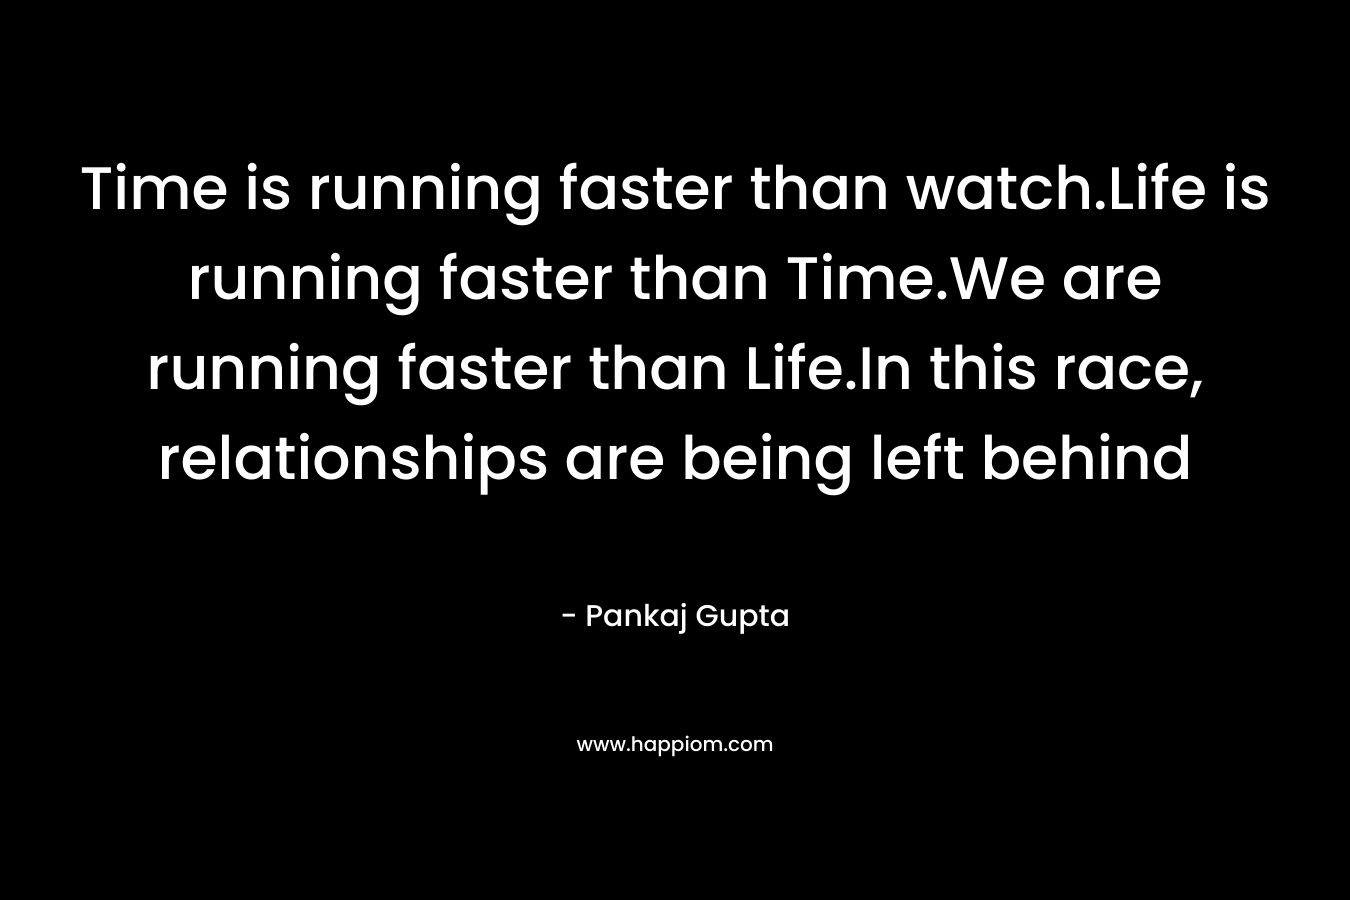 Time is running faster than watch.Life is running faster than Time.We are running faster than Life.In this race, relationships are being left behind – Pankaj Gupta